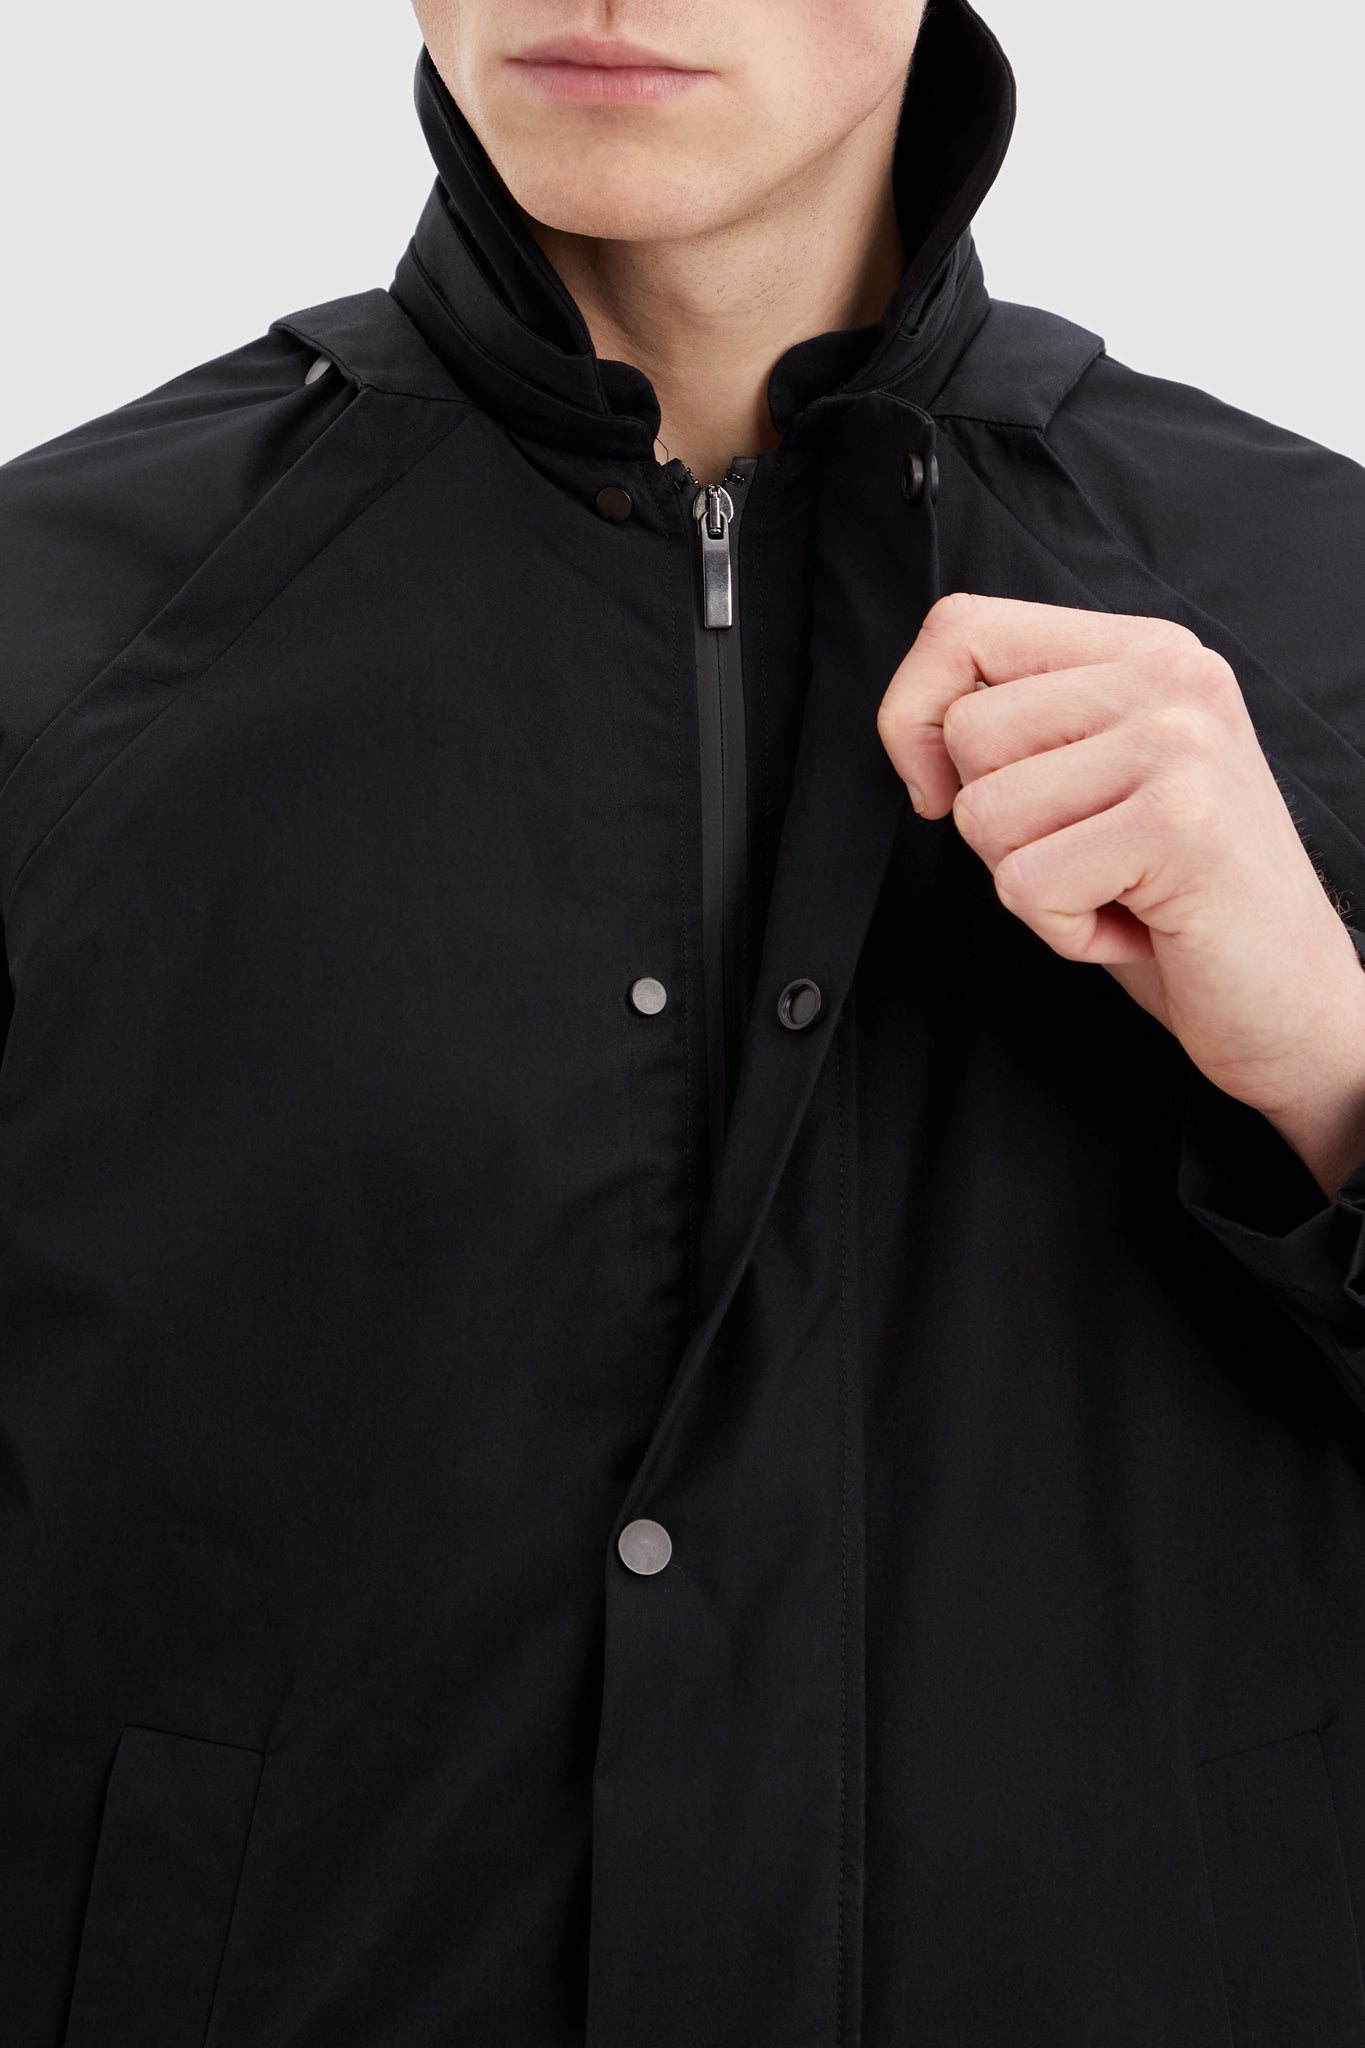 100% Organic Cotton Jacket in colour black  in front 